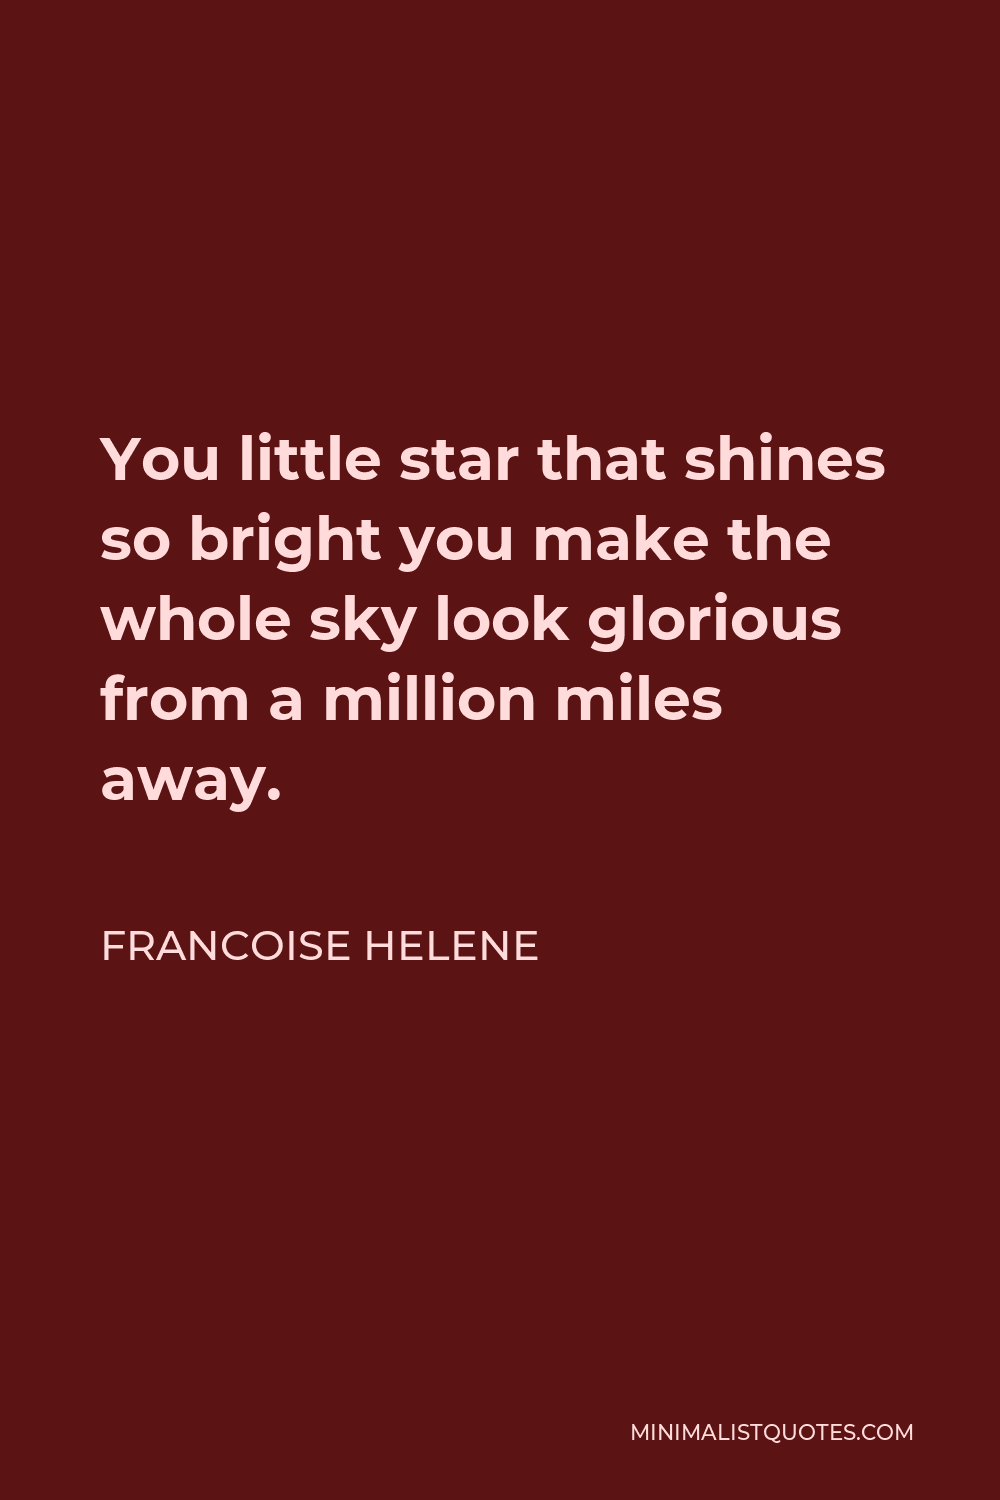 Francoise Helene Quote - You little star that shines so bright you make the whole sky look glorious from a million miles away.